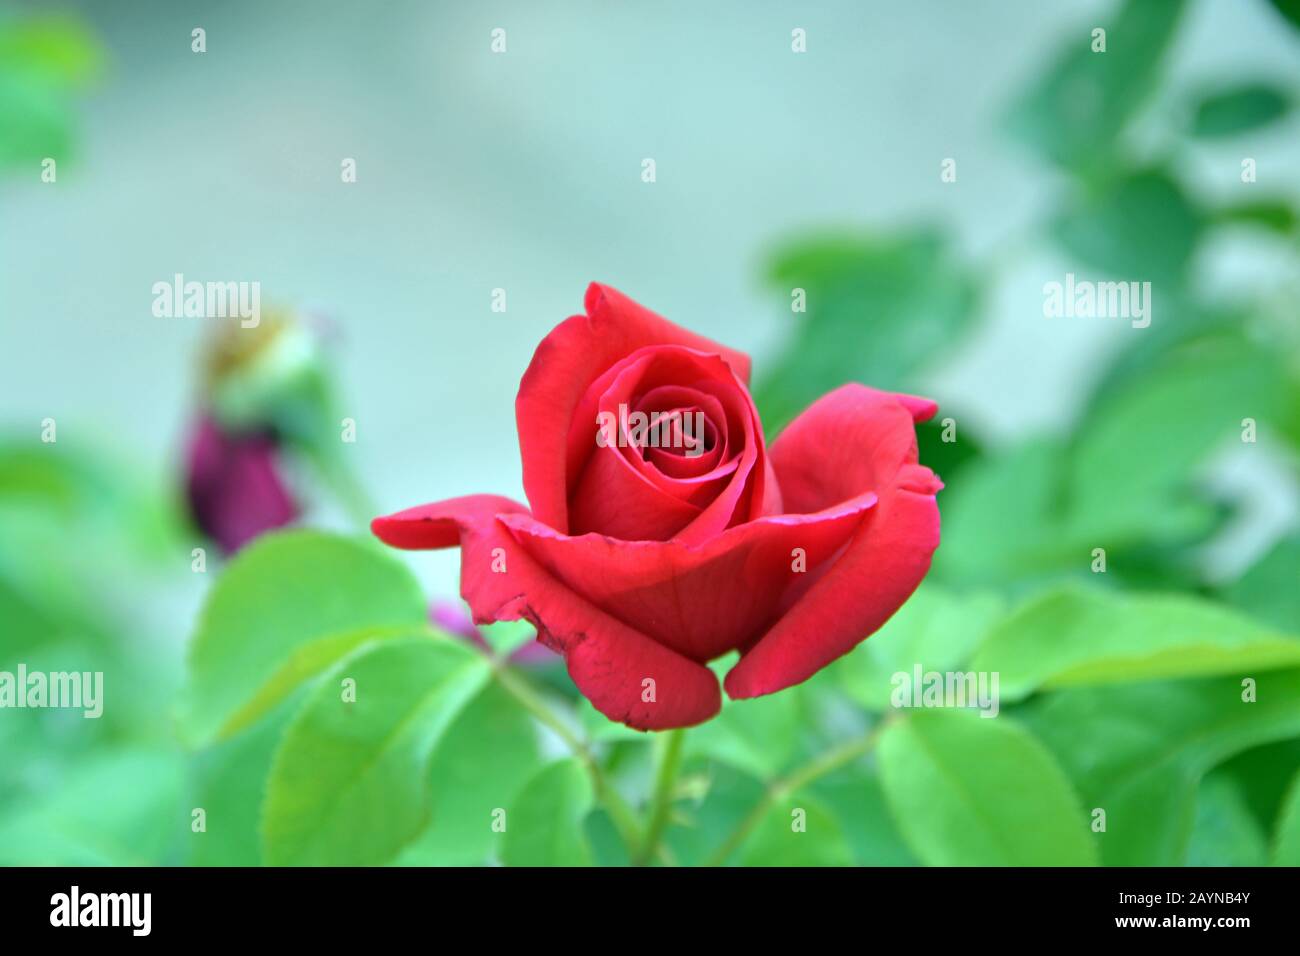 Red rose of Israel Stock Photo - Alamy